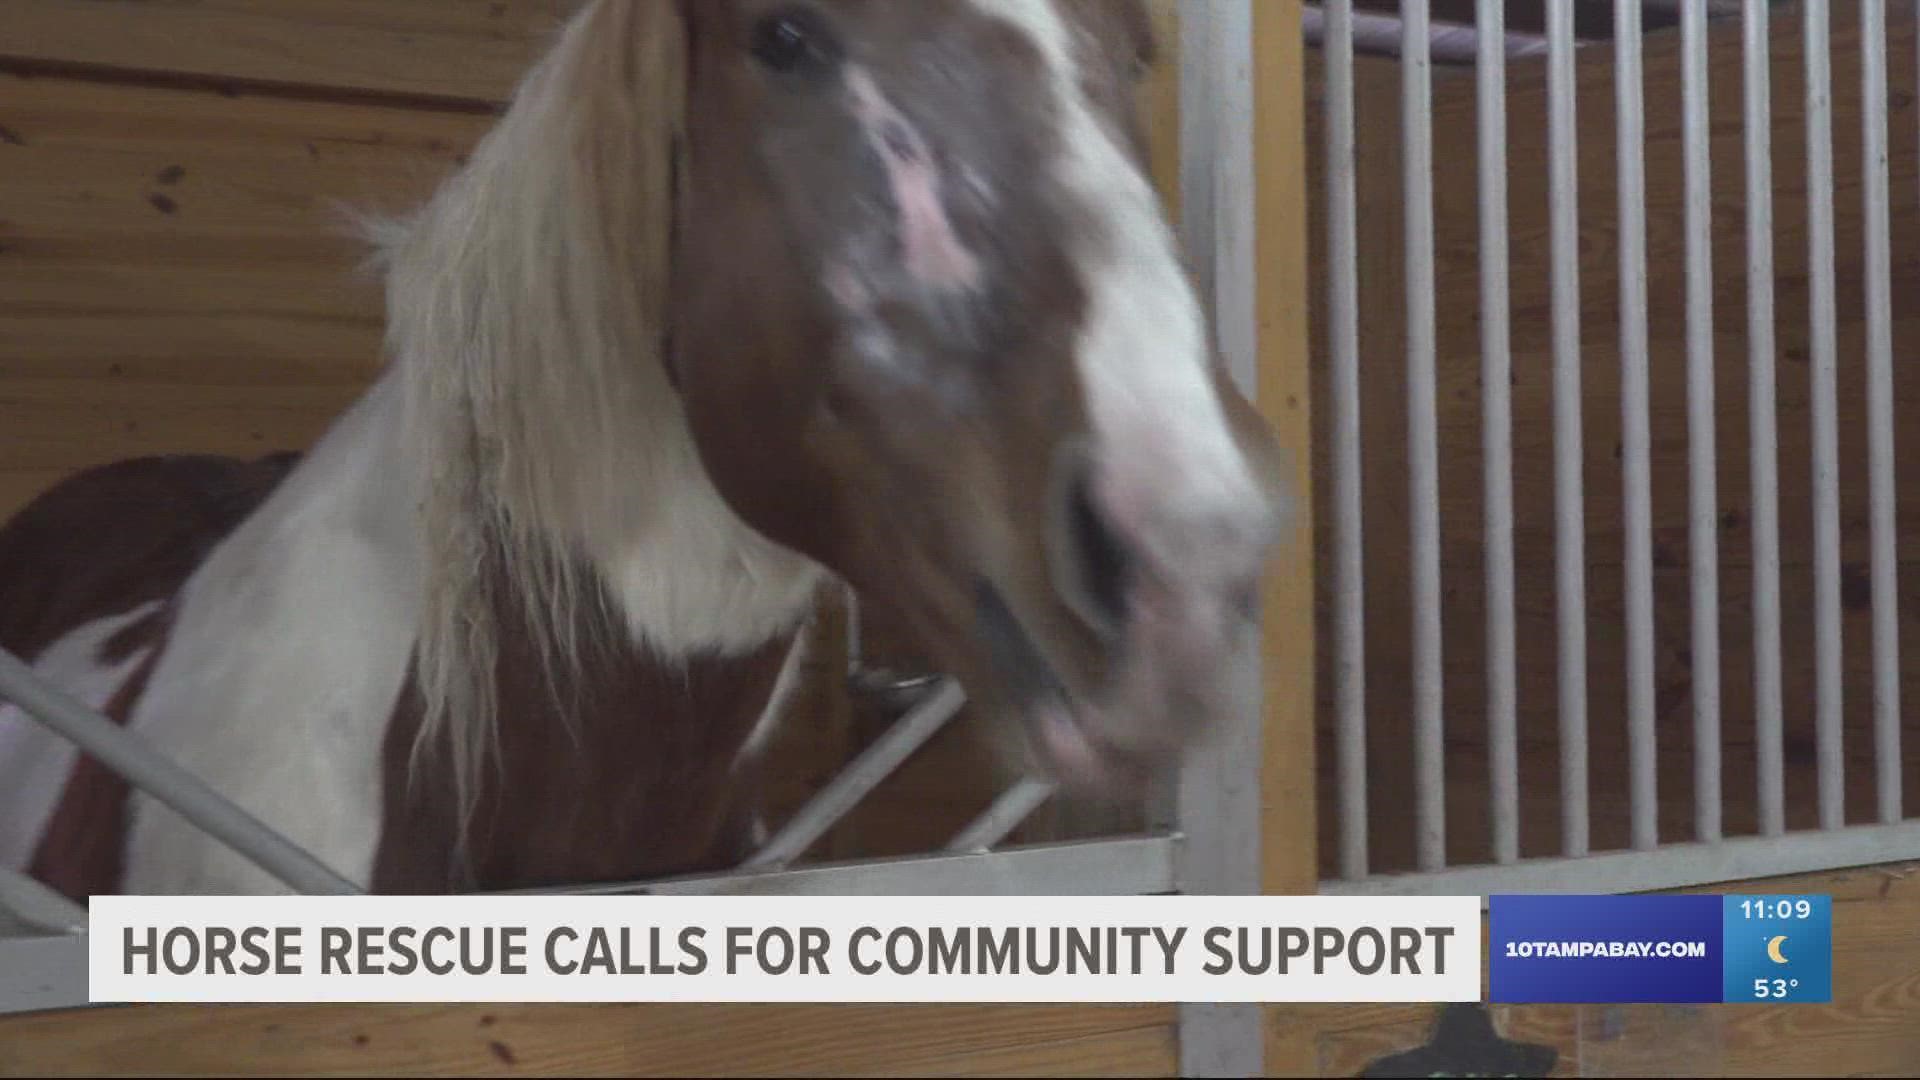 The rescue is hoping that community members can find it in their hearts to help by volunteering, donating feed, or adopting/sponsoring a horse.